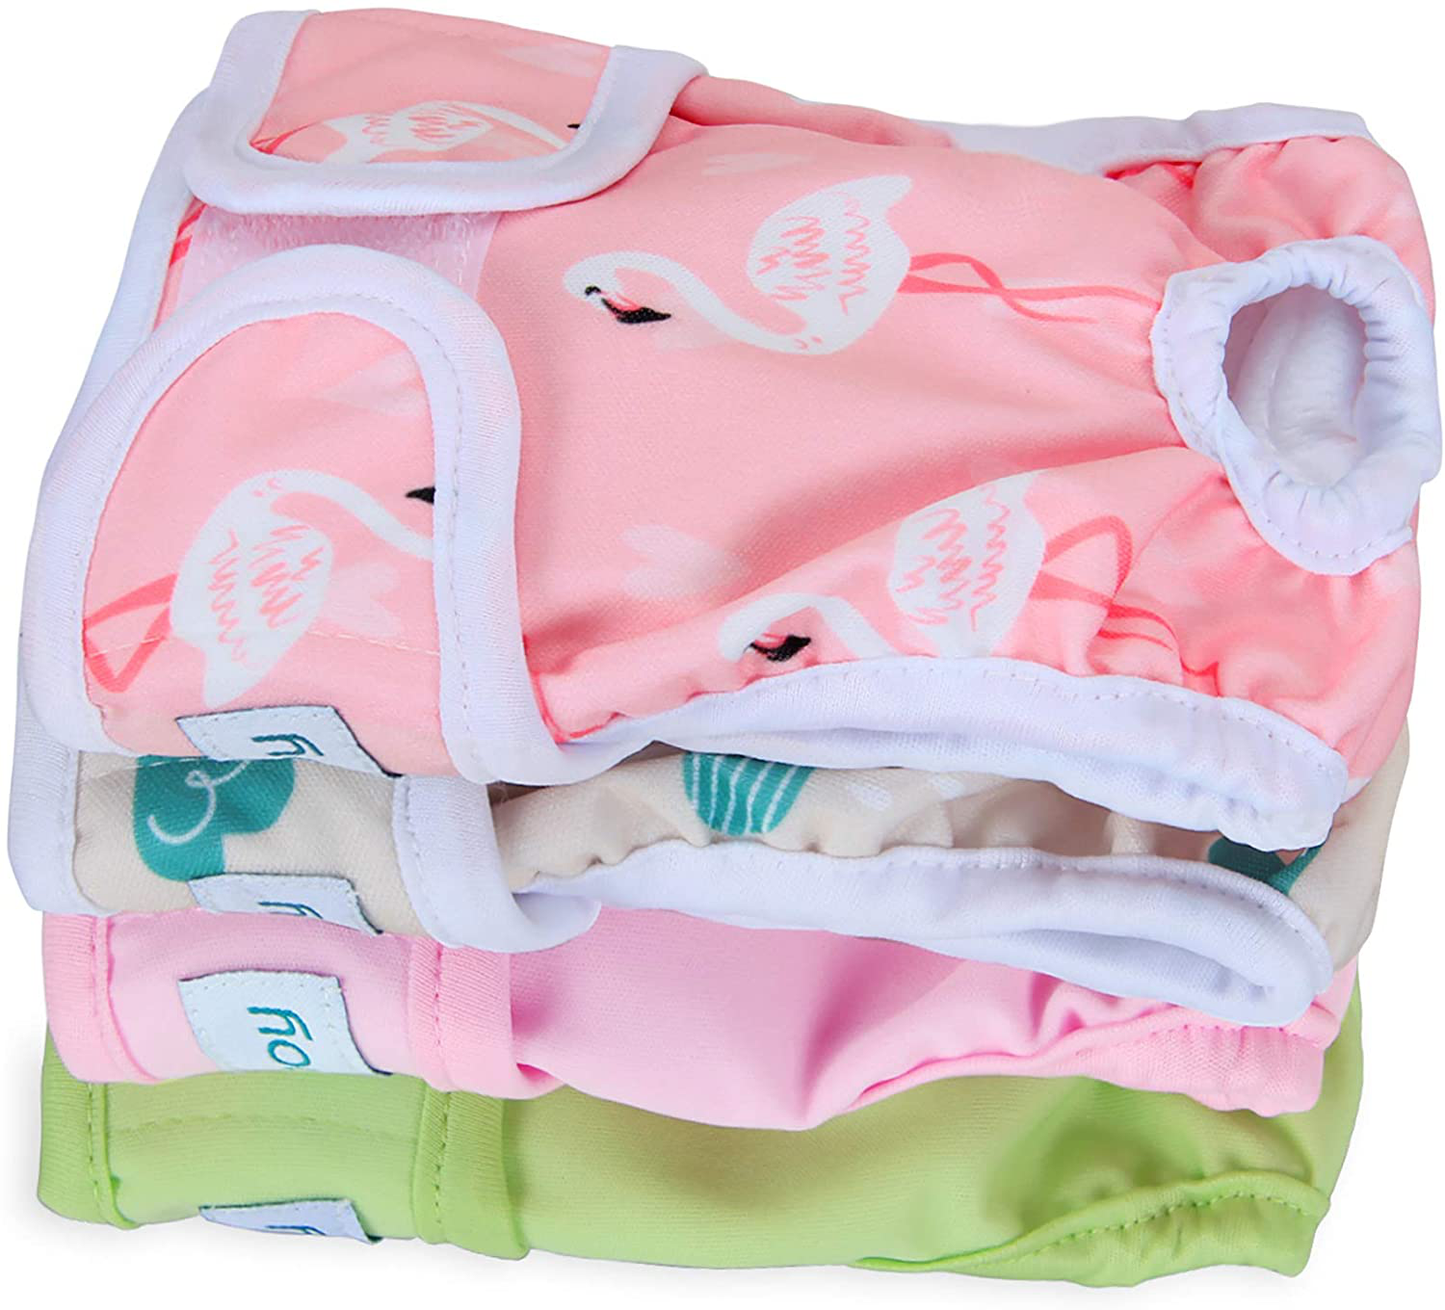 Teamoy Washable Female Dog Diapers, Reusable Doggie Diaper Wraps for Female Dogs, Super-Absorbent and Comfortable Animals & Pet Supplies > Pet Supplies > Dog Supplies > Dog Diaper Pads & Liners Teamoy Flamingo+ Cloud+ Green+ Pink (4pcs) XS (Pack of 4) 